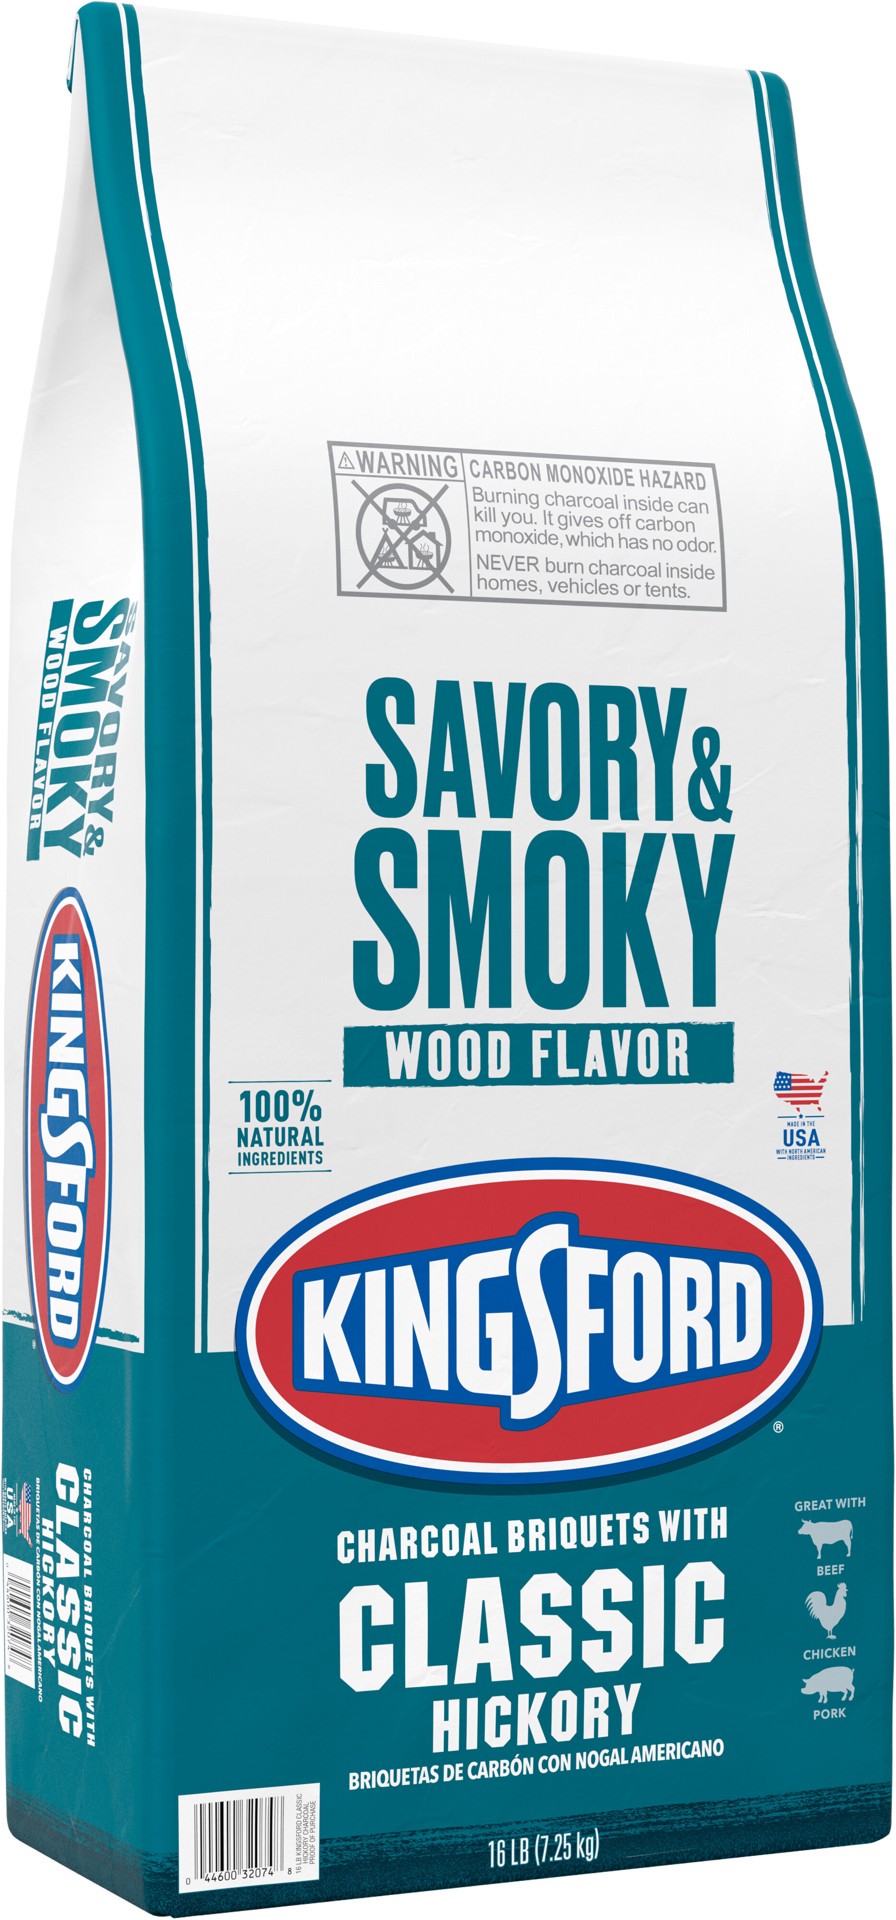 slide 5 of 5, Kingsford Charcoal with Classic Hickory Briquettes, 16 lb